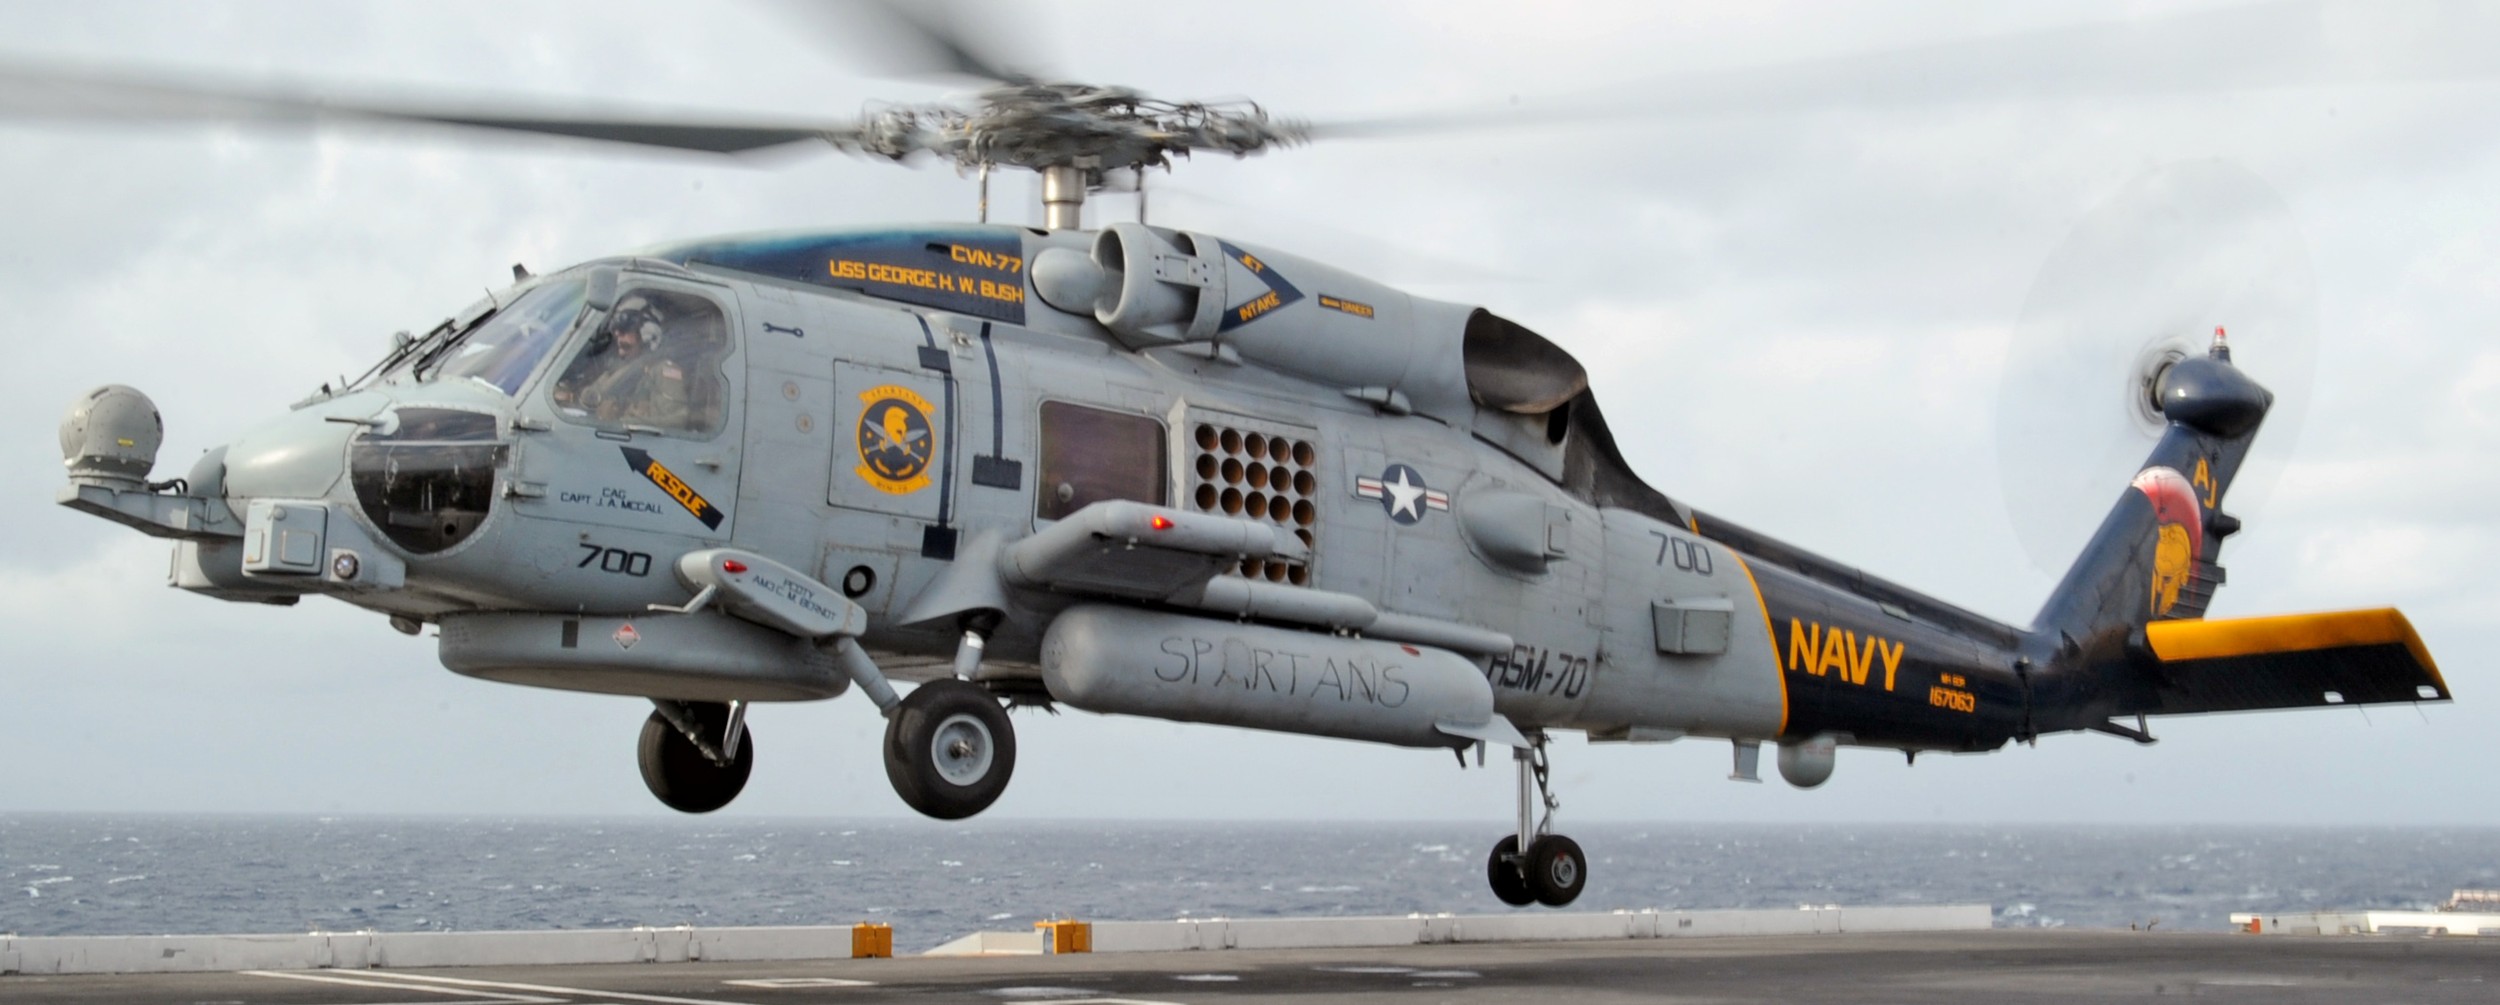 hsm-70 spartans helicopter maritime strike squadron mh-60r seahawk 2016 77